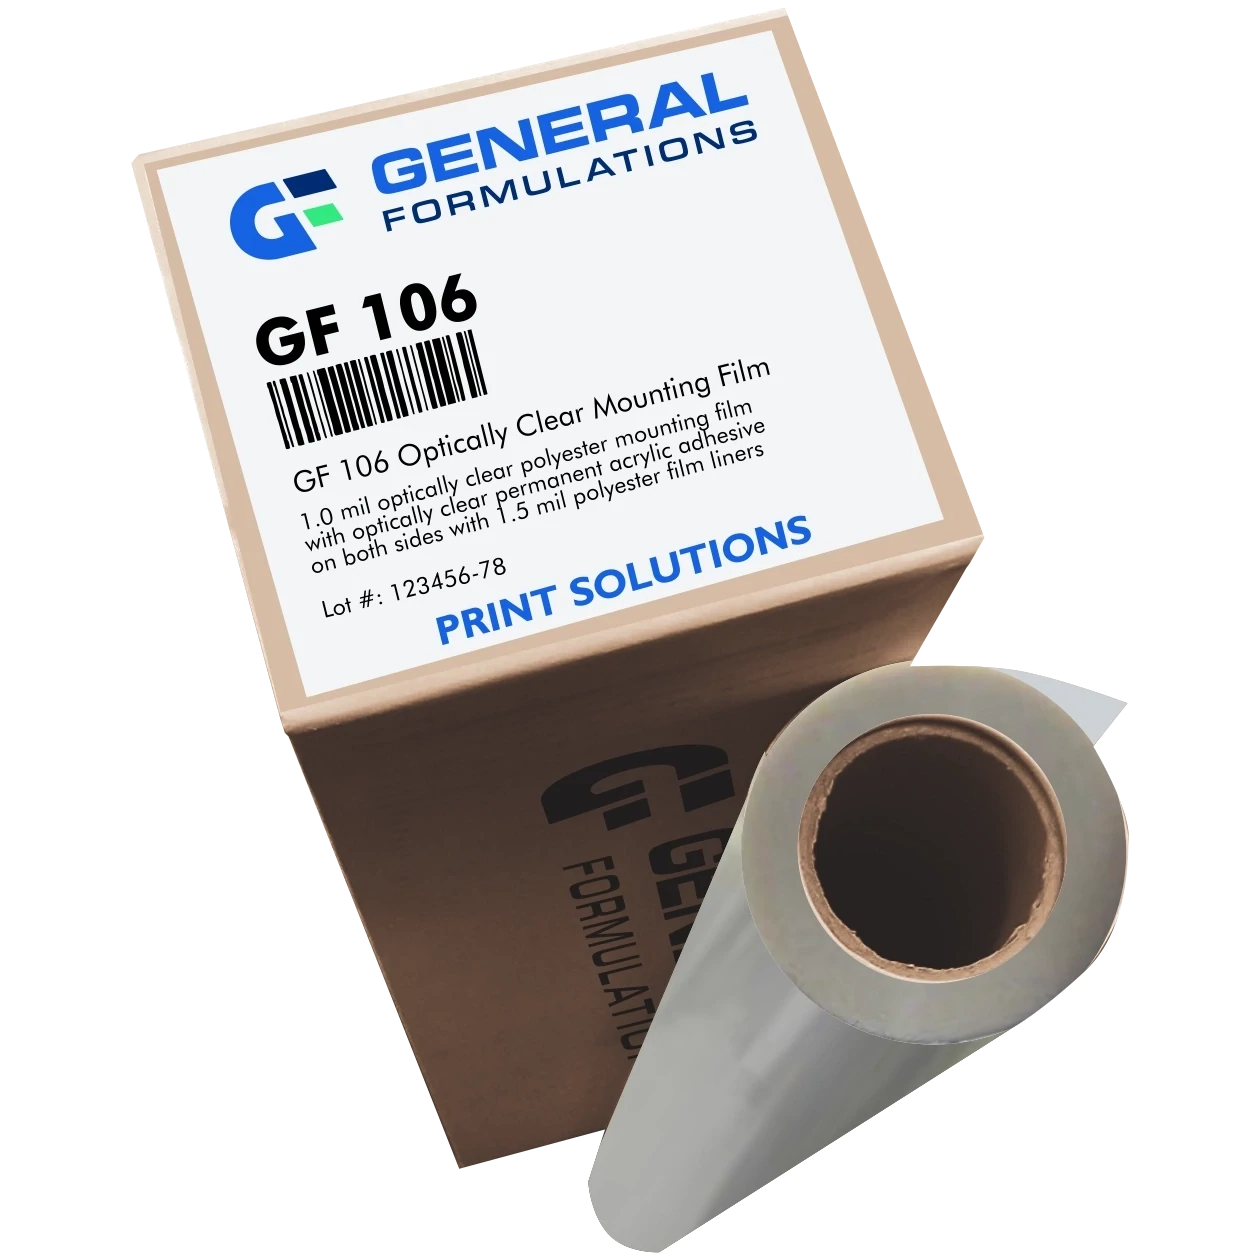 General Formulations 106 Optically Clear Double Adhesive Mounting Film - Permanent, Select Size: 31" x 150"